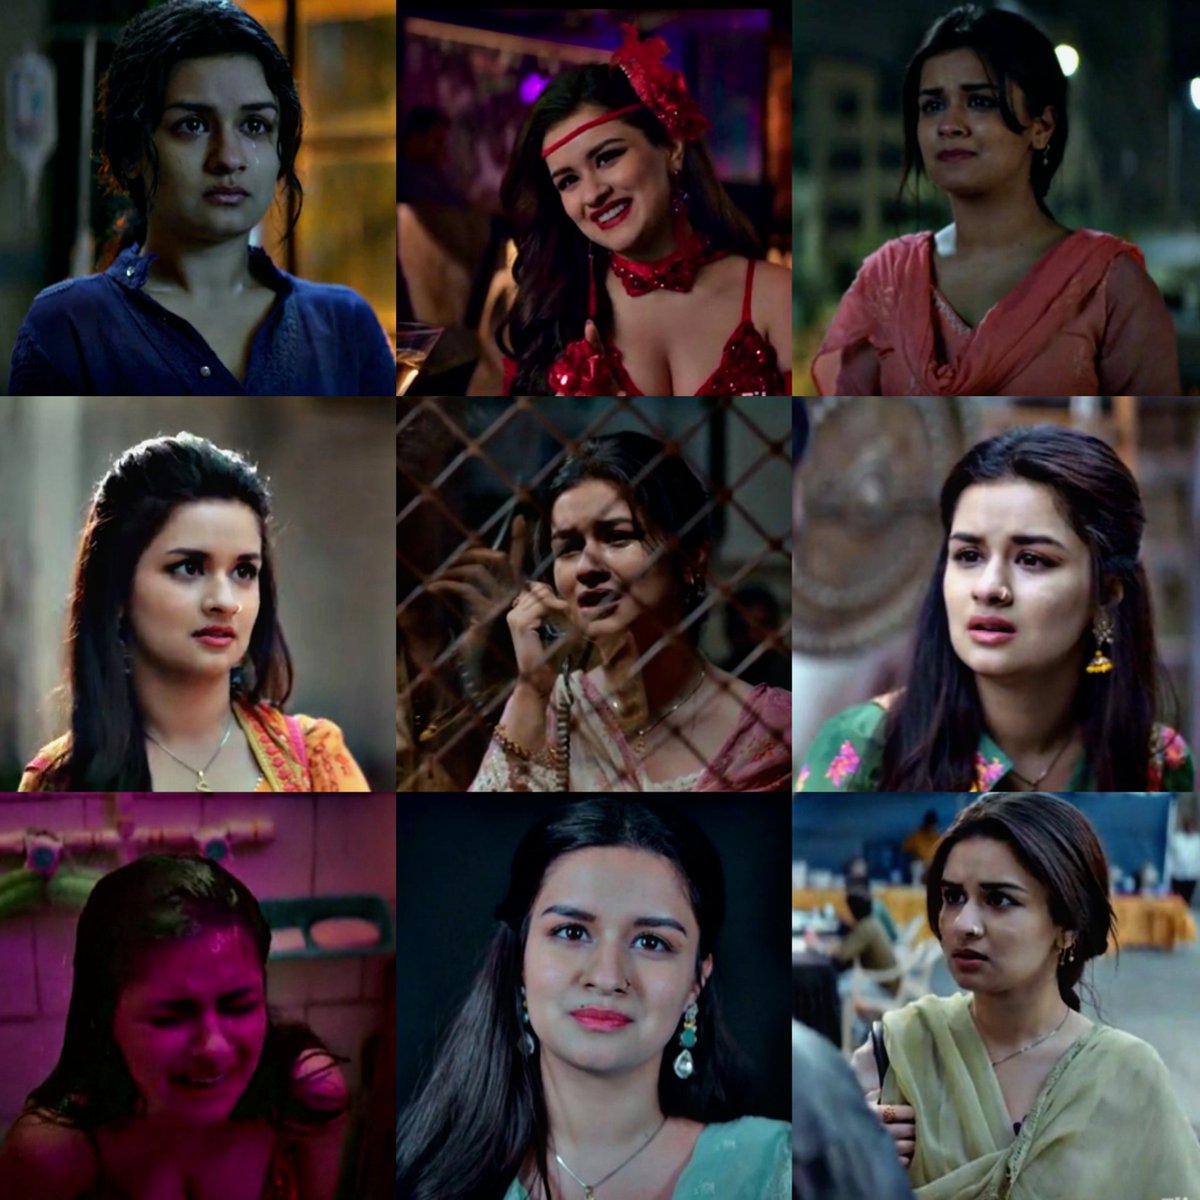 Completed watching #TikuWedsSheruOnPrime and #AvneetKaur is literally the soul of the movie!! She portrayed all the emotions of a layered character like Tiku so wonderfully!! Pulling off this role wasn't easy! Totally a star in her debut film! 
#TikuWedsSheruReview #TikuWedsSheru